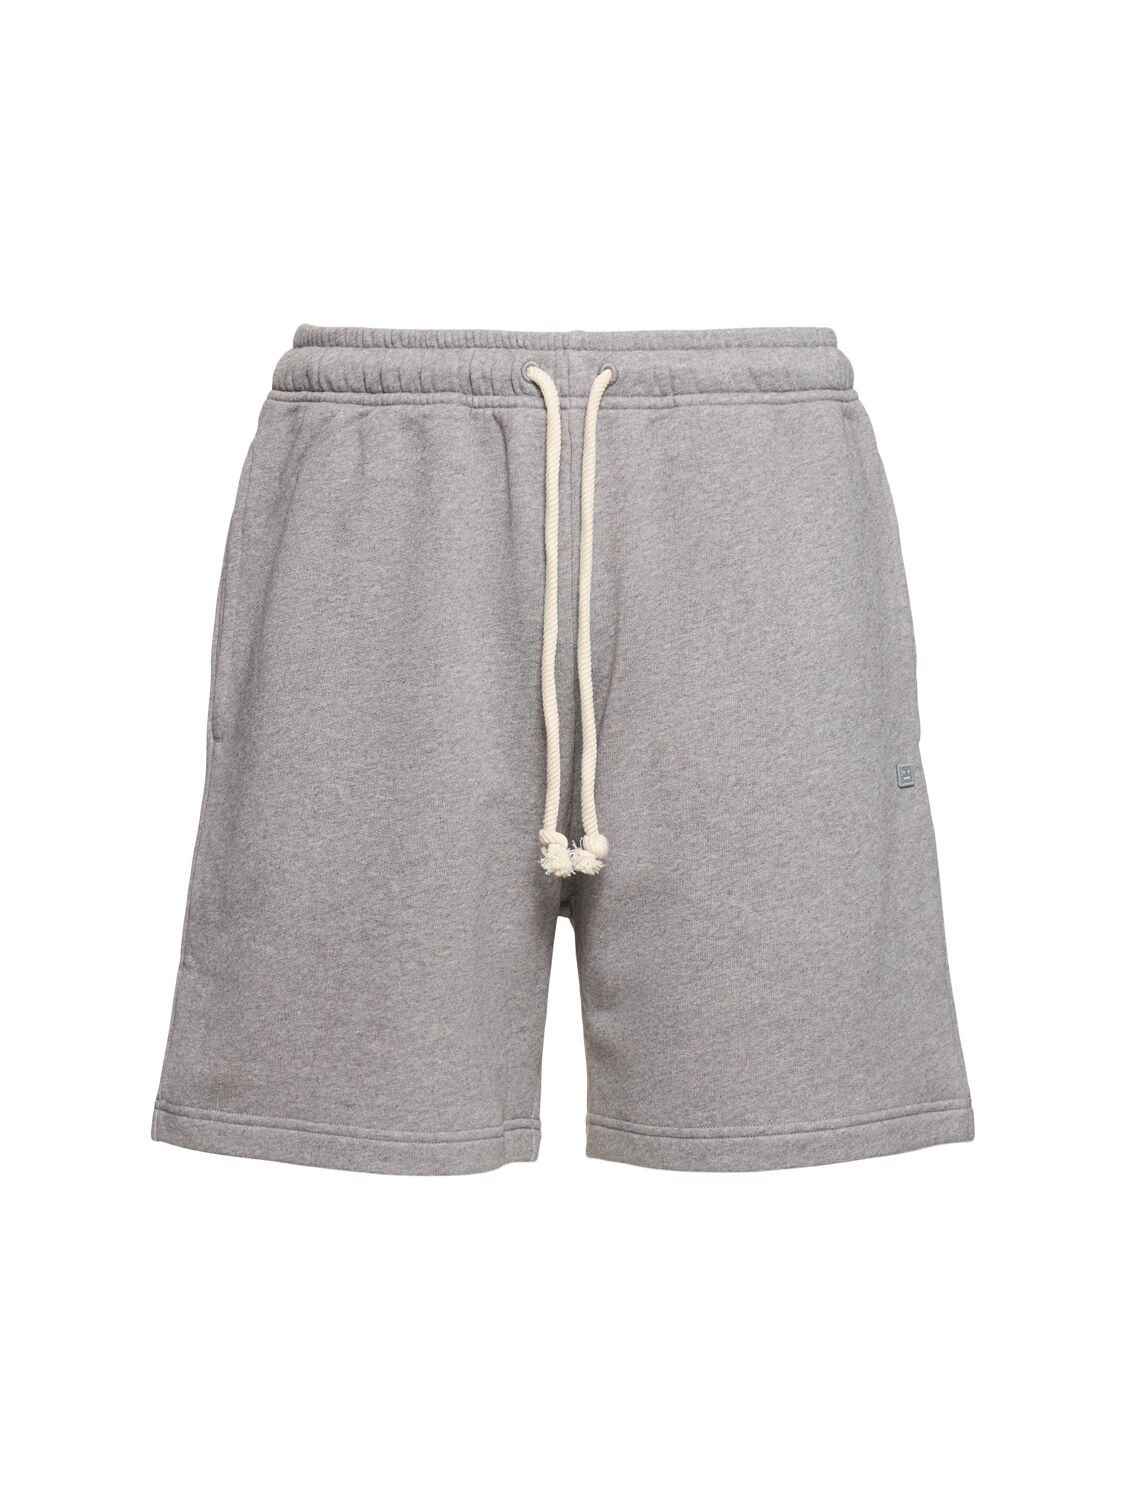 Acne Studios Forge M Face Regular Fit Shorts In Gray